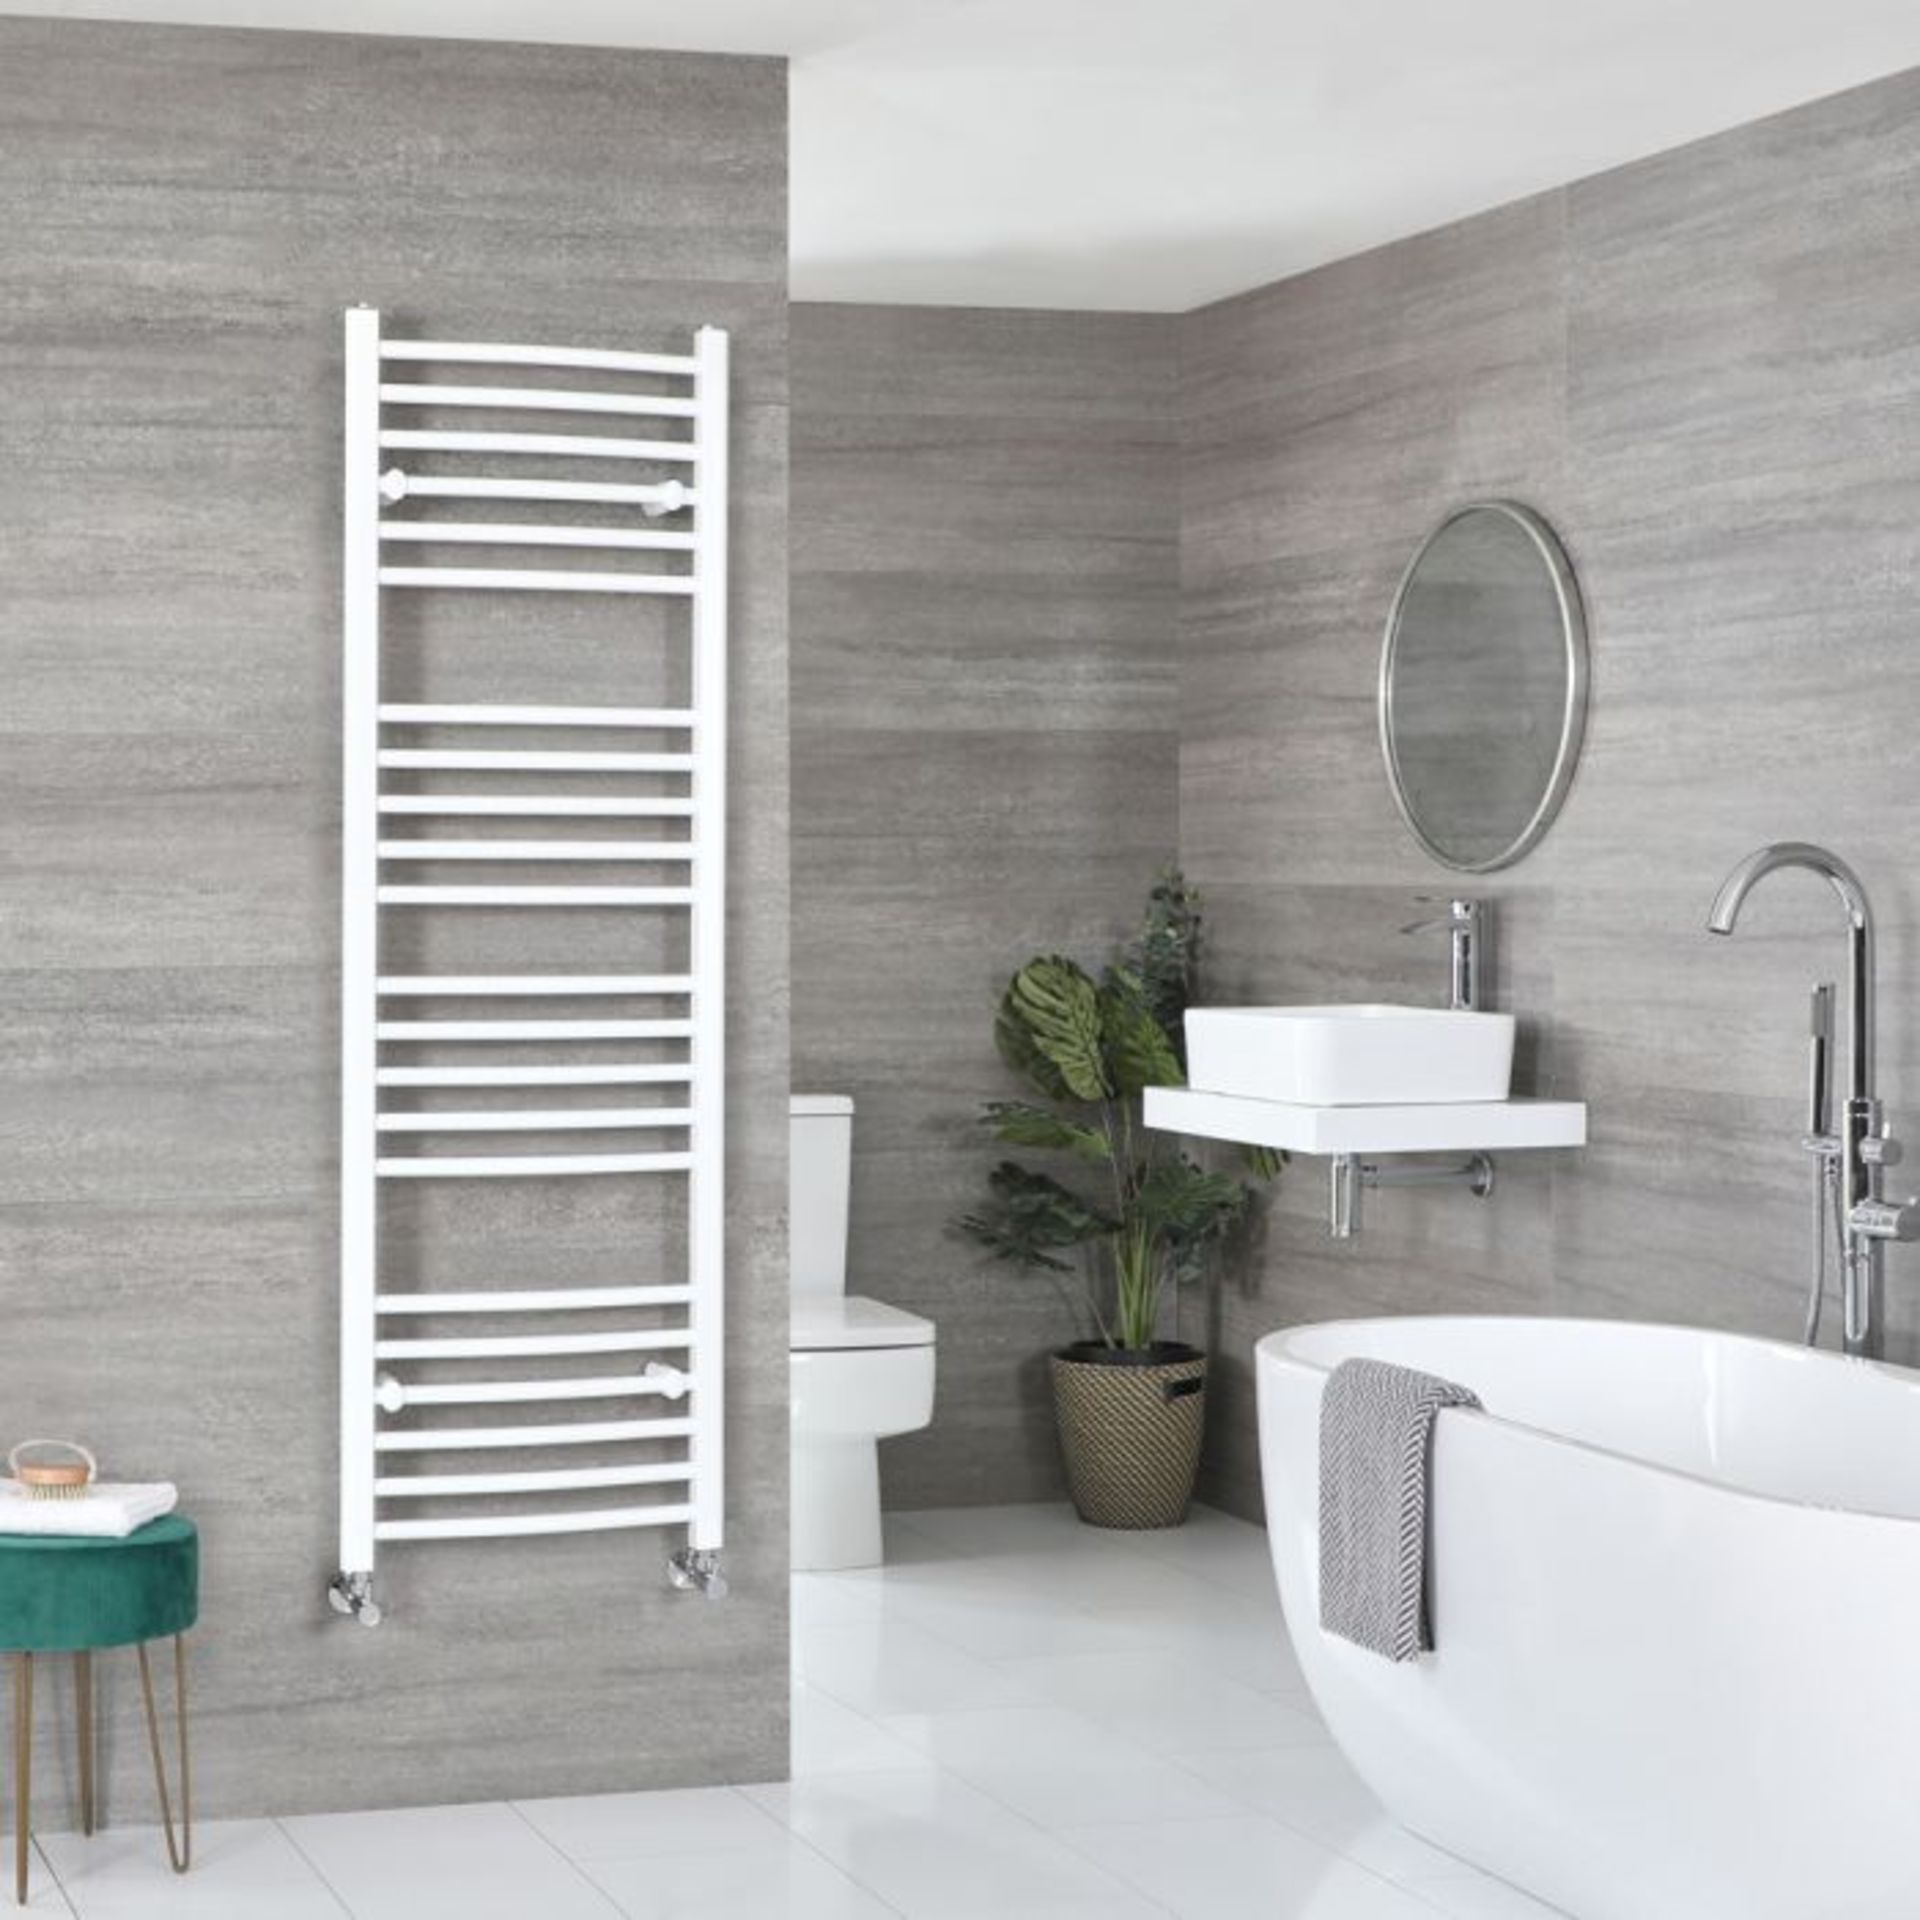 NEW (EX195) 1600x500mm Curved White Heated Towel Rail.